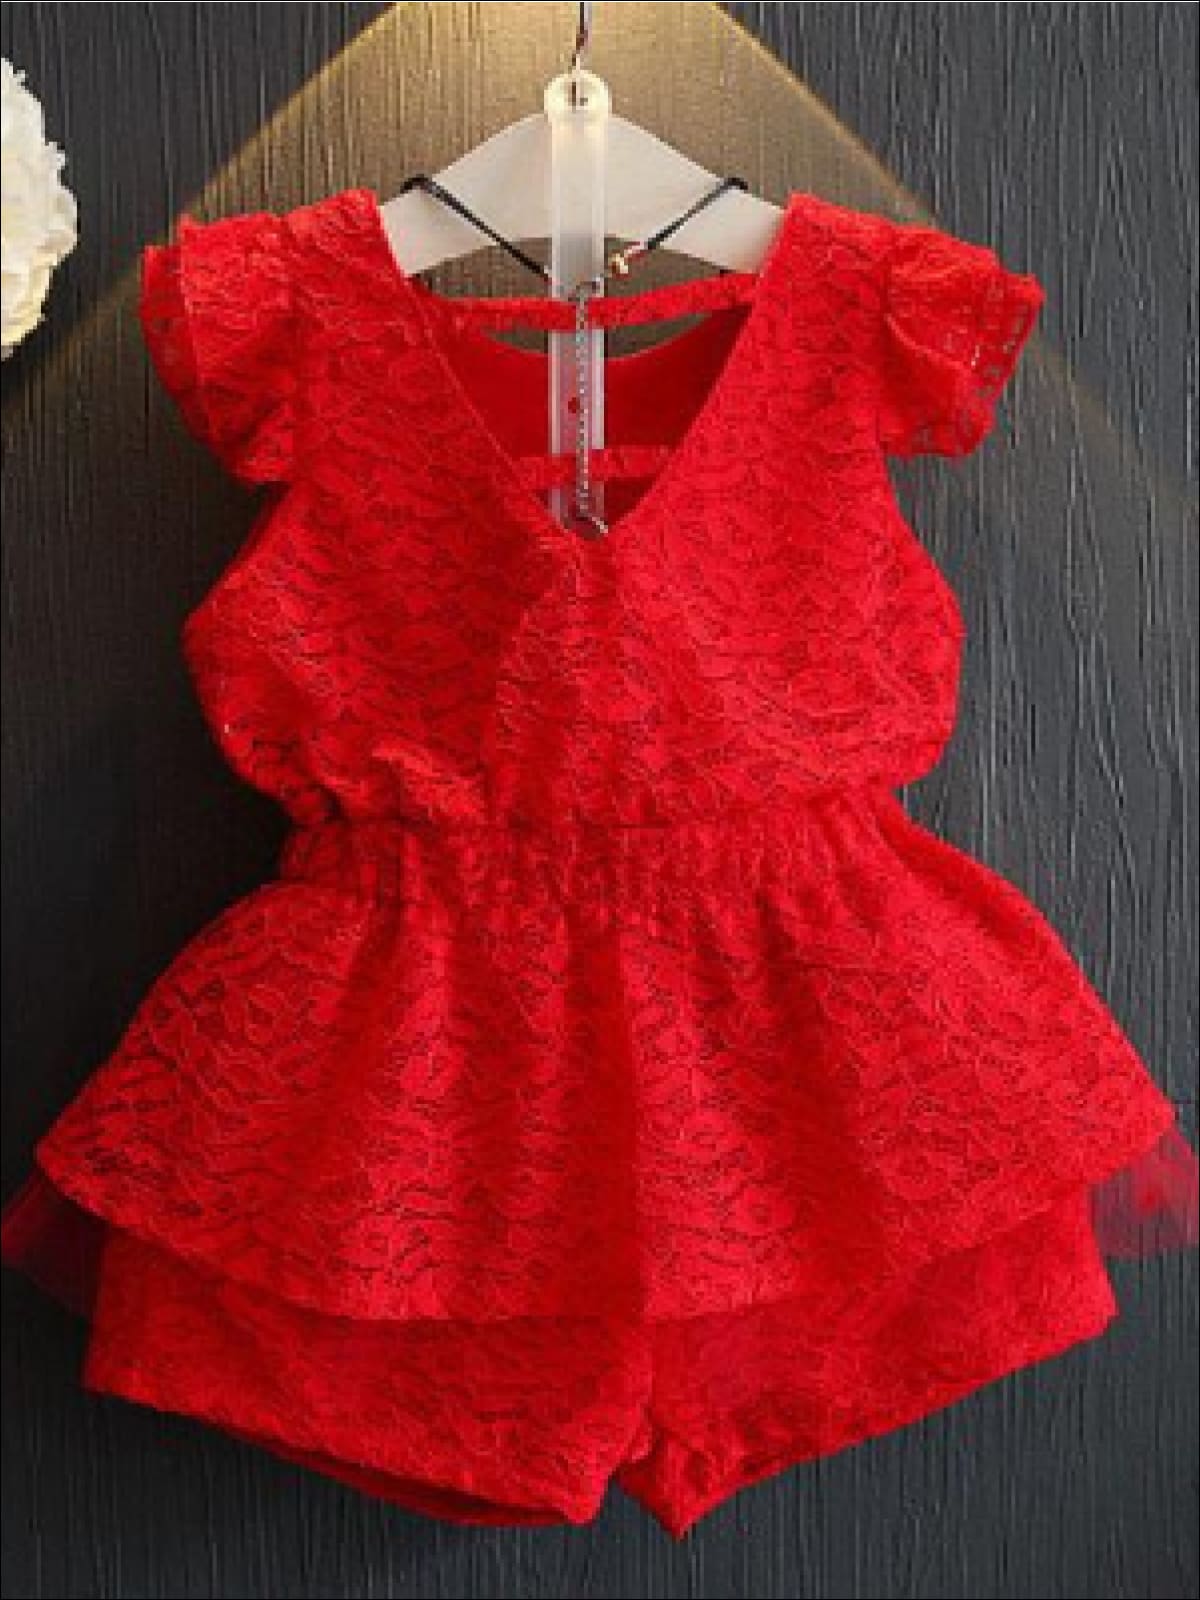 Spring Clothes For Girls | Red Lace Peplum Top & Lace Shorts Set